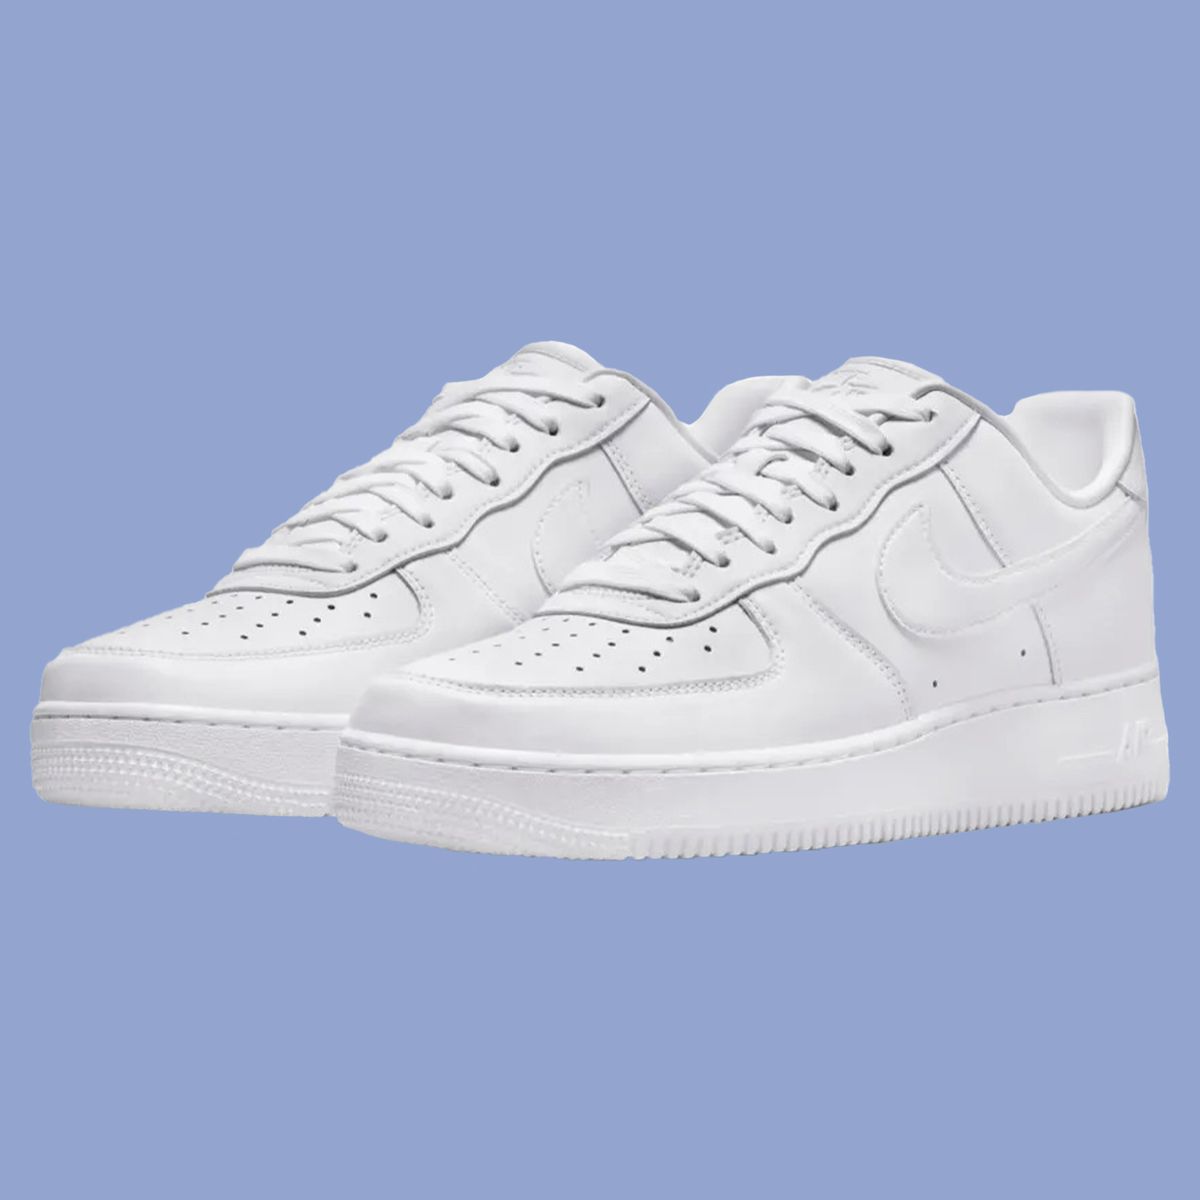 wastafel haai Krijgsgevangene Nike's New Air Force 1s Are Designed to Look Fresh Forever. Will It Work?